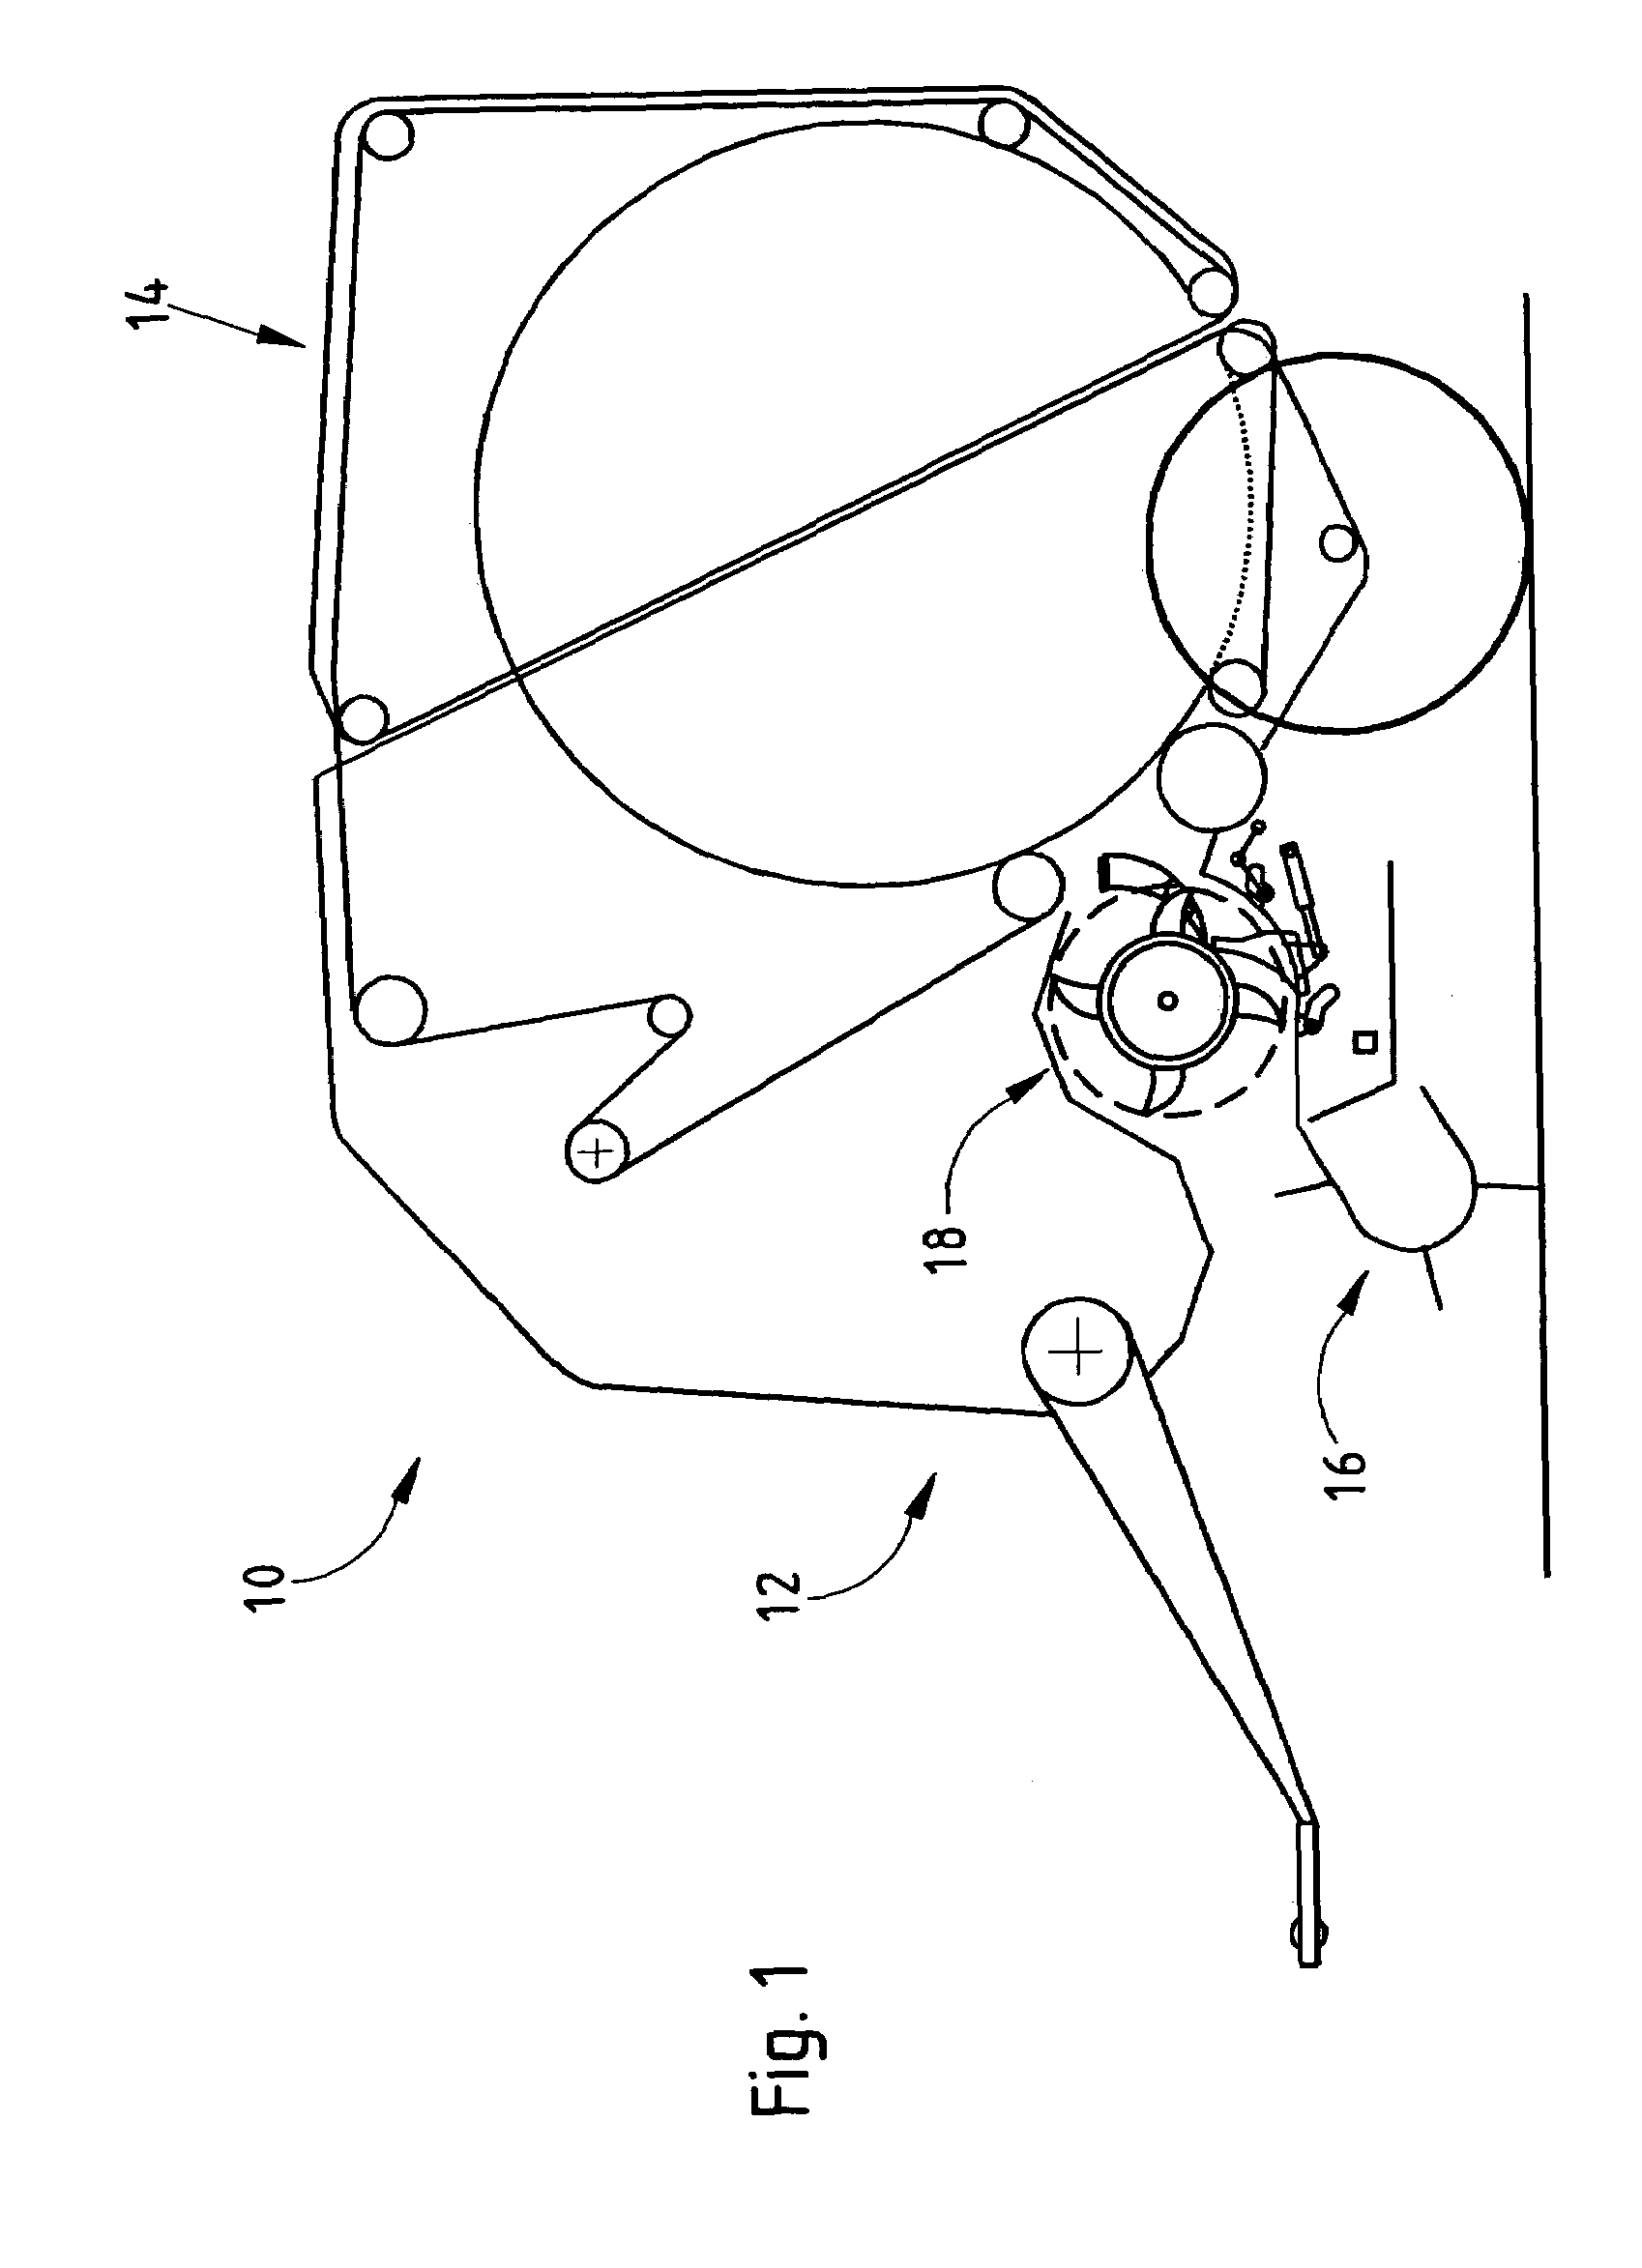 Crop processing device with relief system